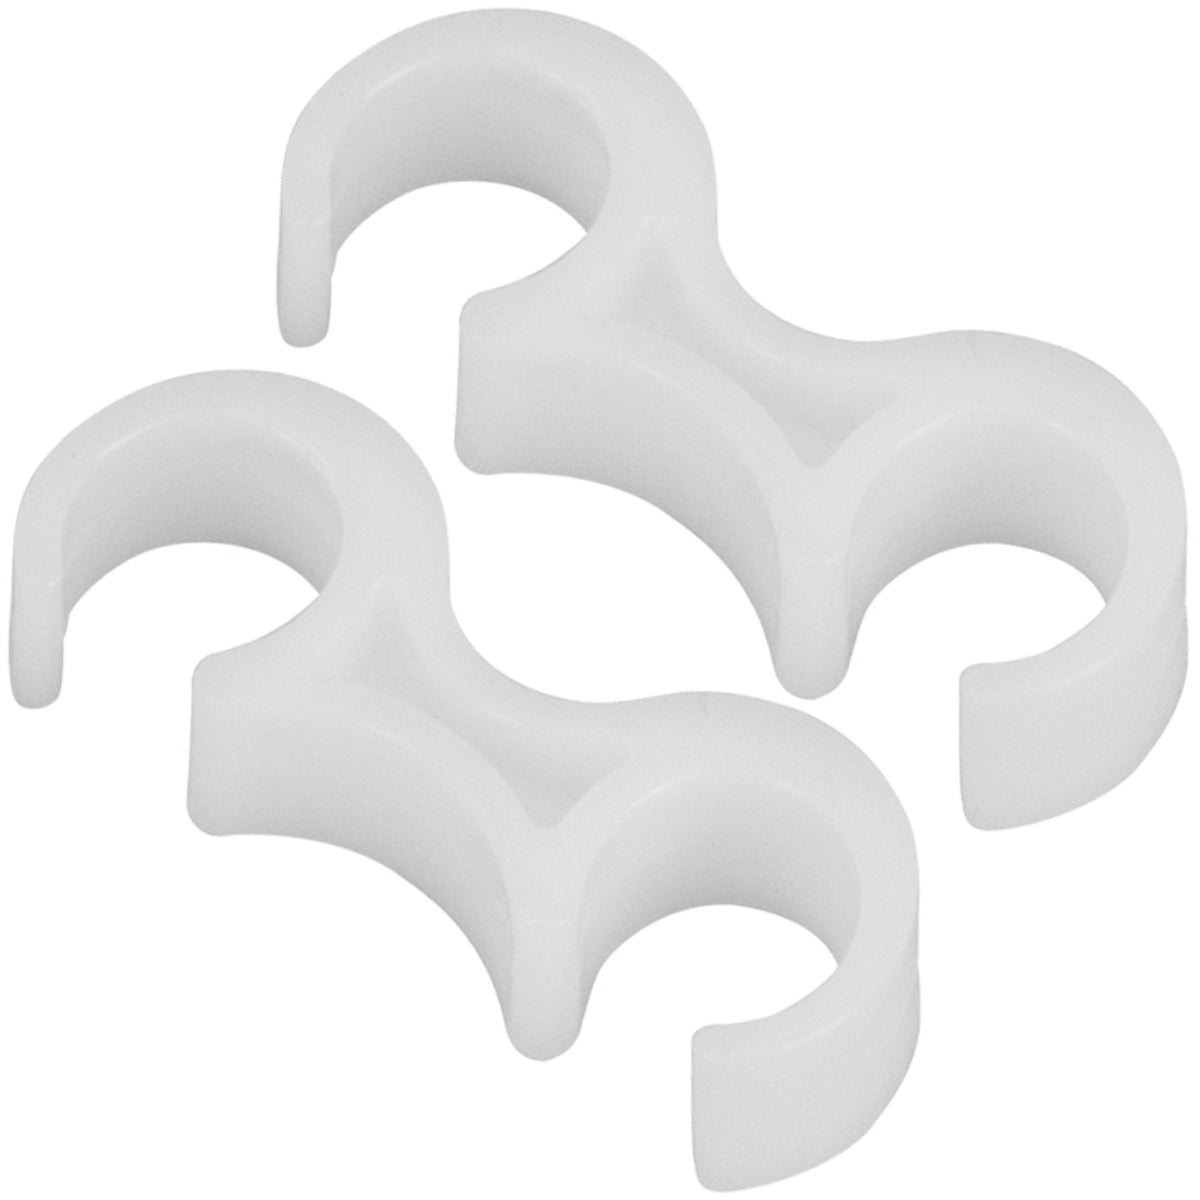 White |#| White Plastic Ganging Clips - Set of 2 - Designed To Fit .75inch Diameter Frames